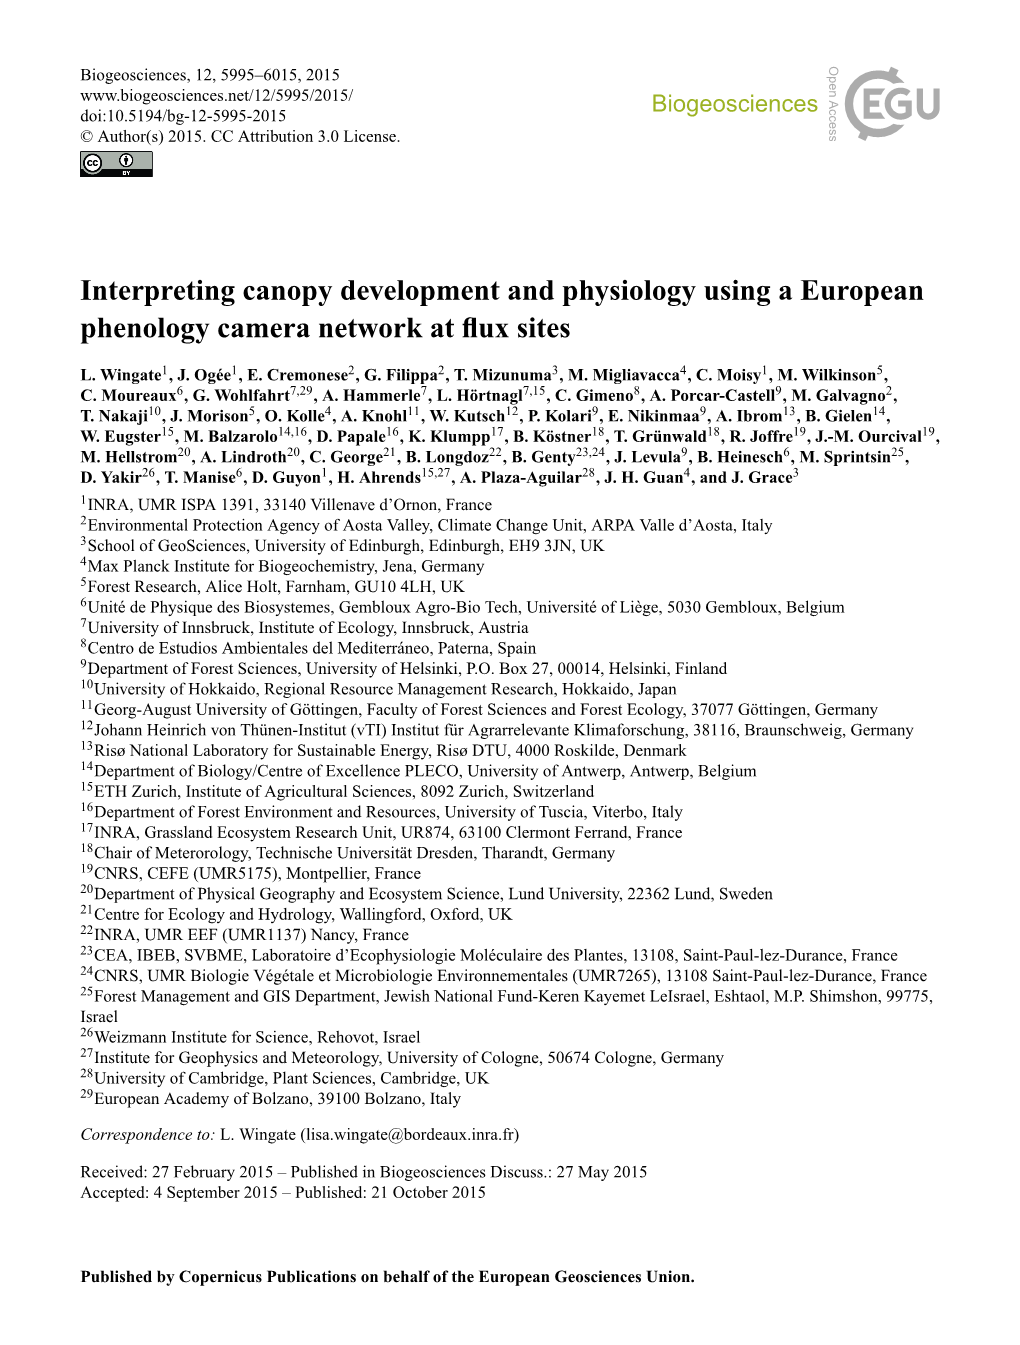 Interpreting Canopy Development and Physiology Using a European Phenology Camera Network at ﬂux Sites